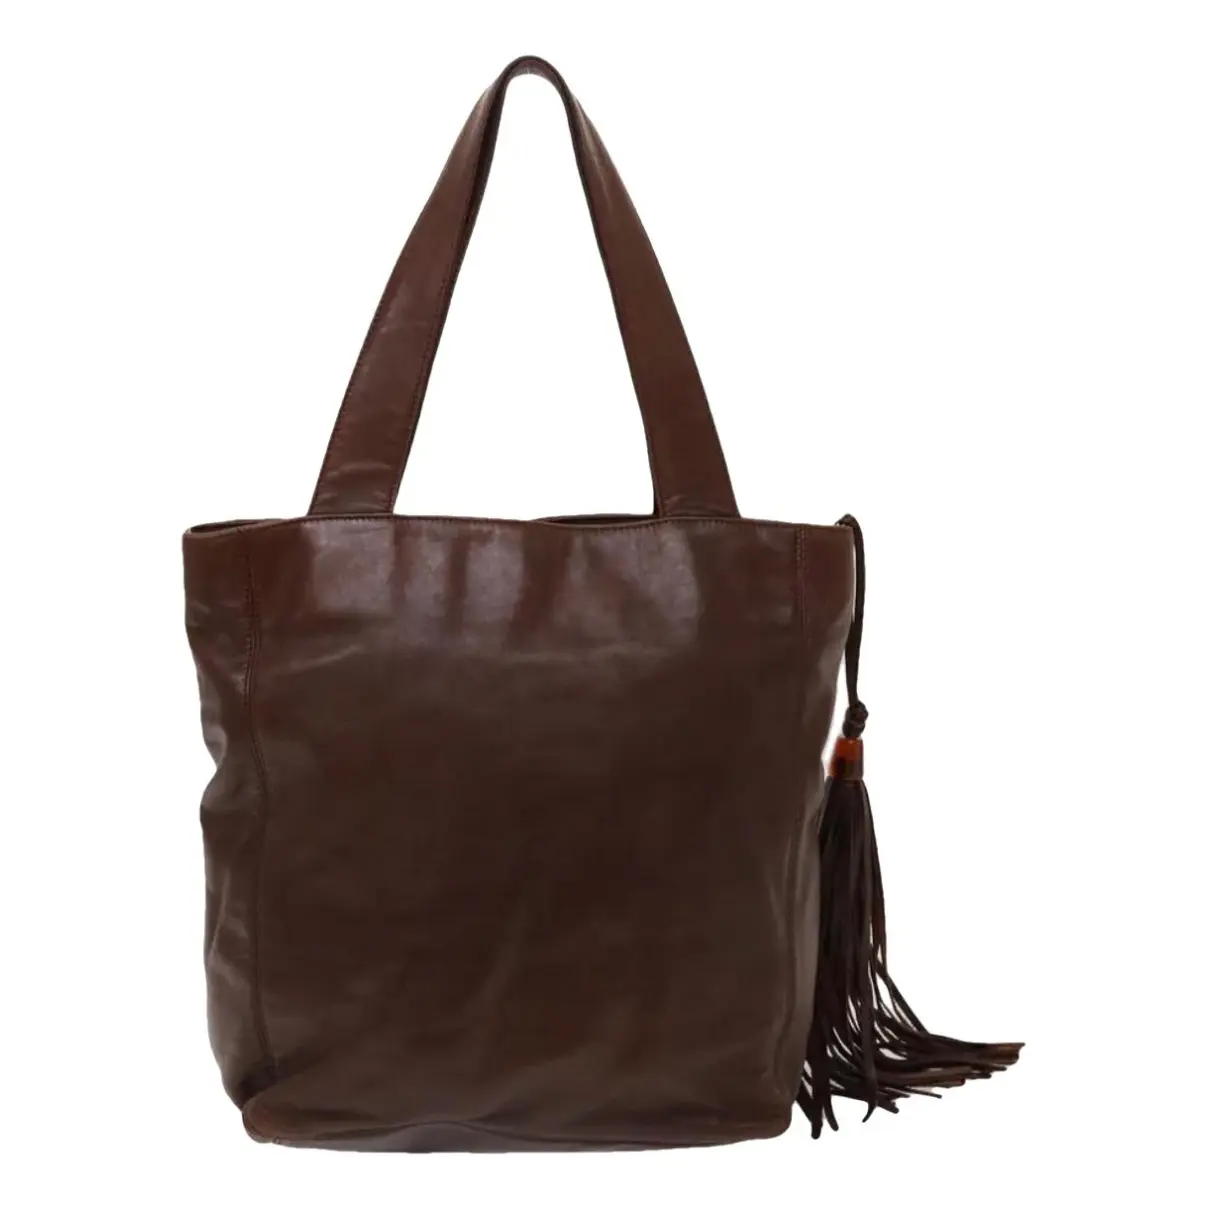 Boy Tote leather tote